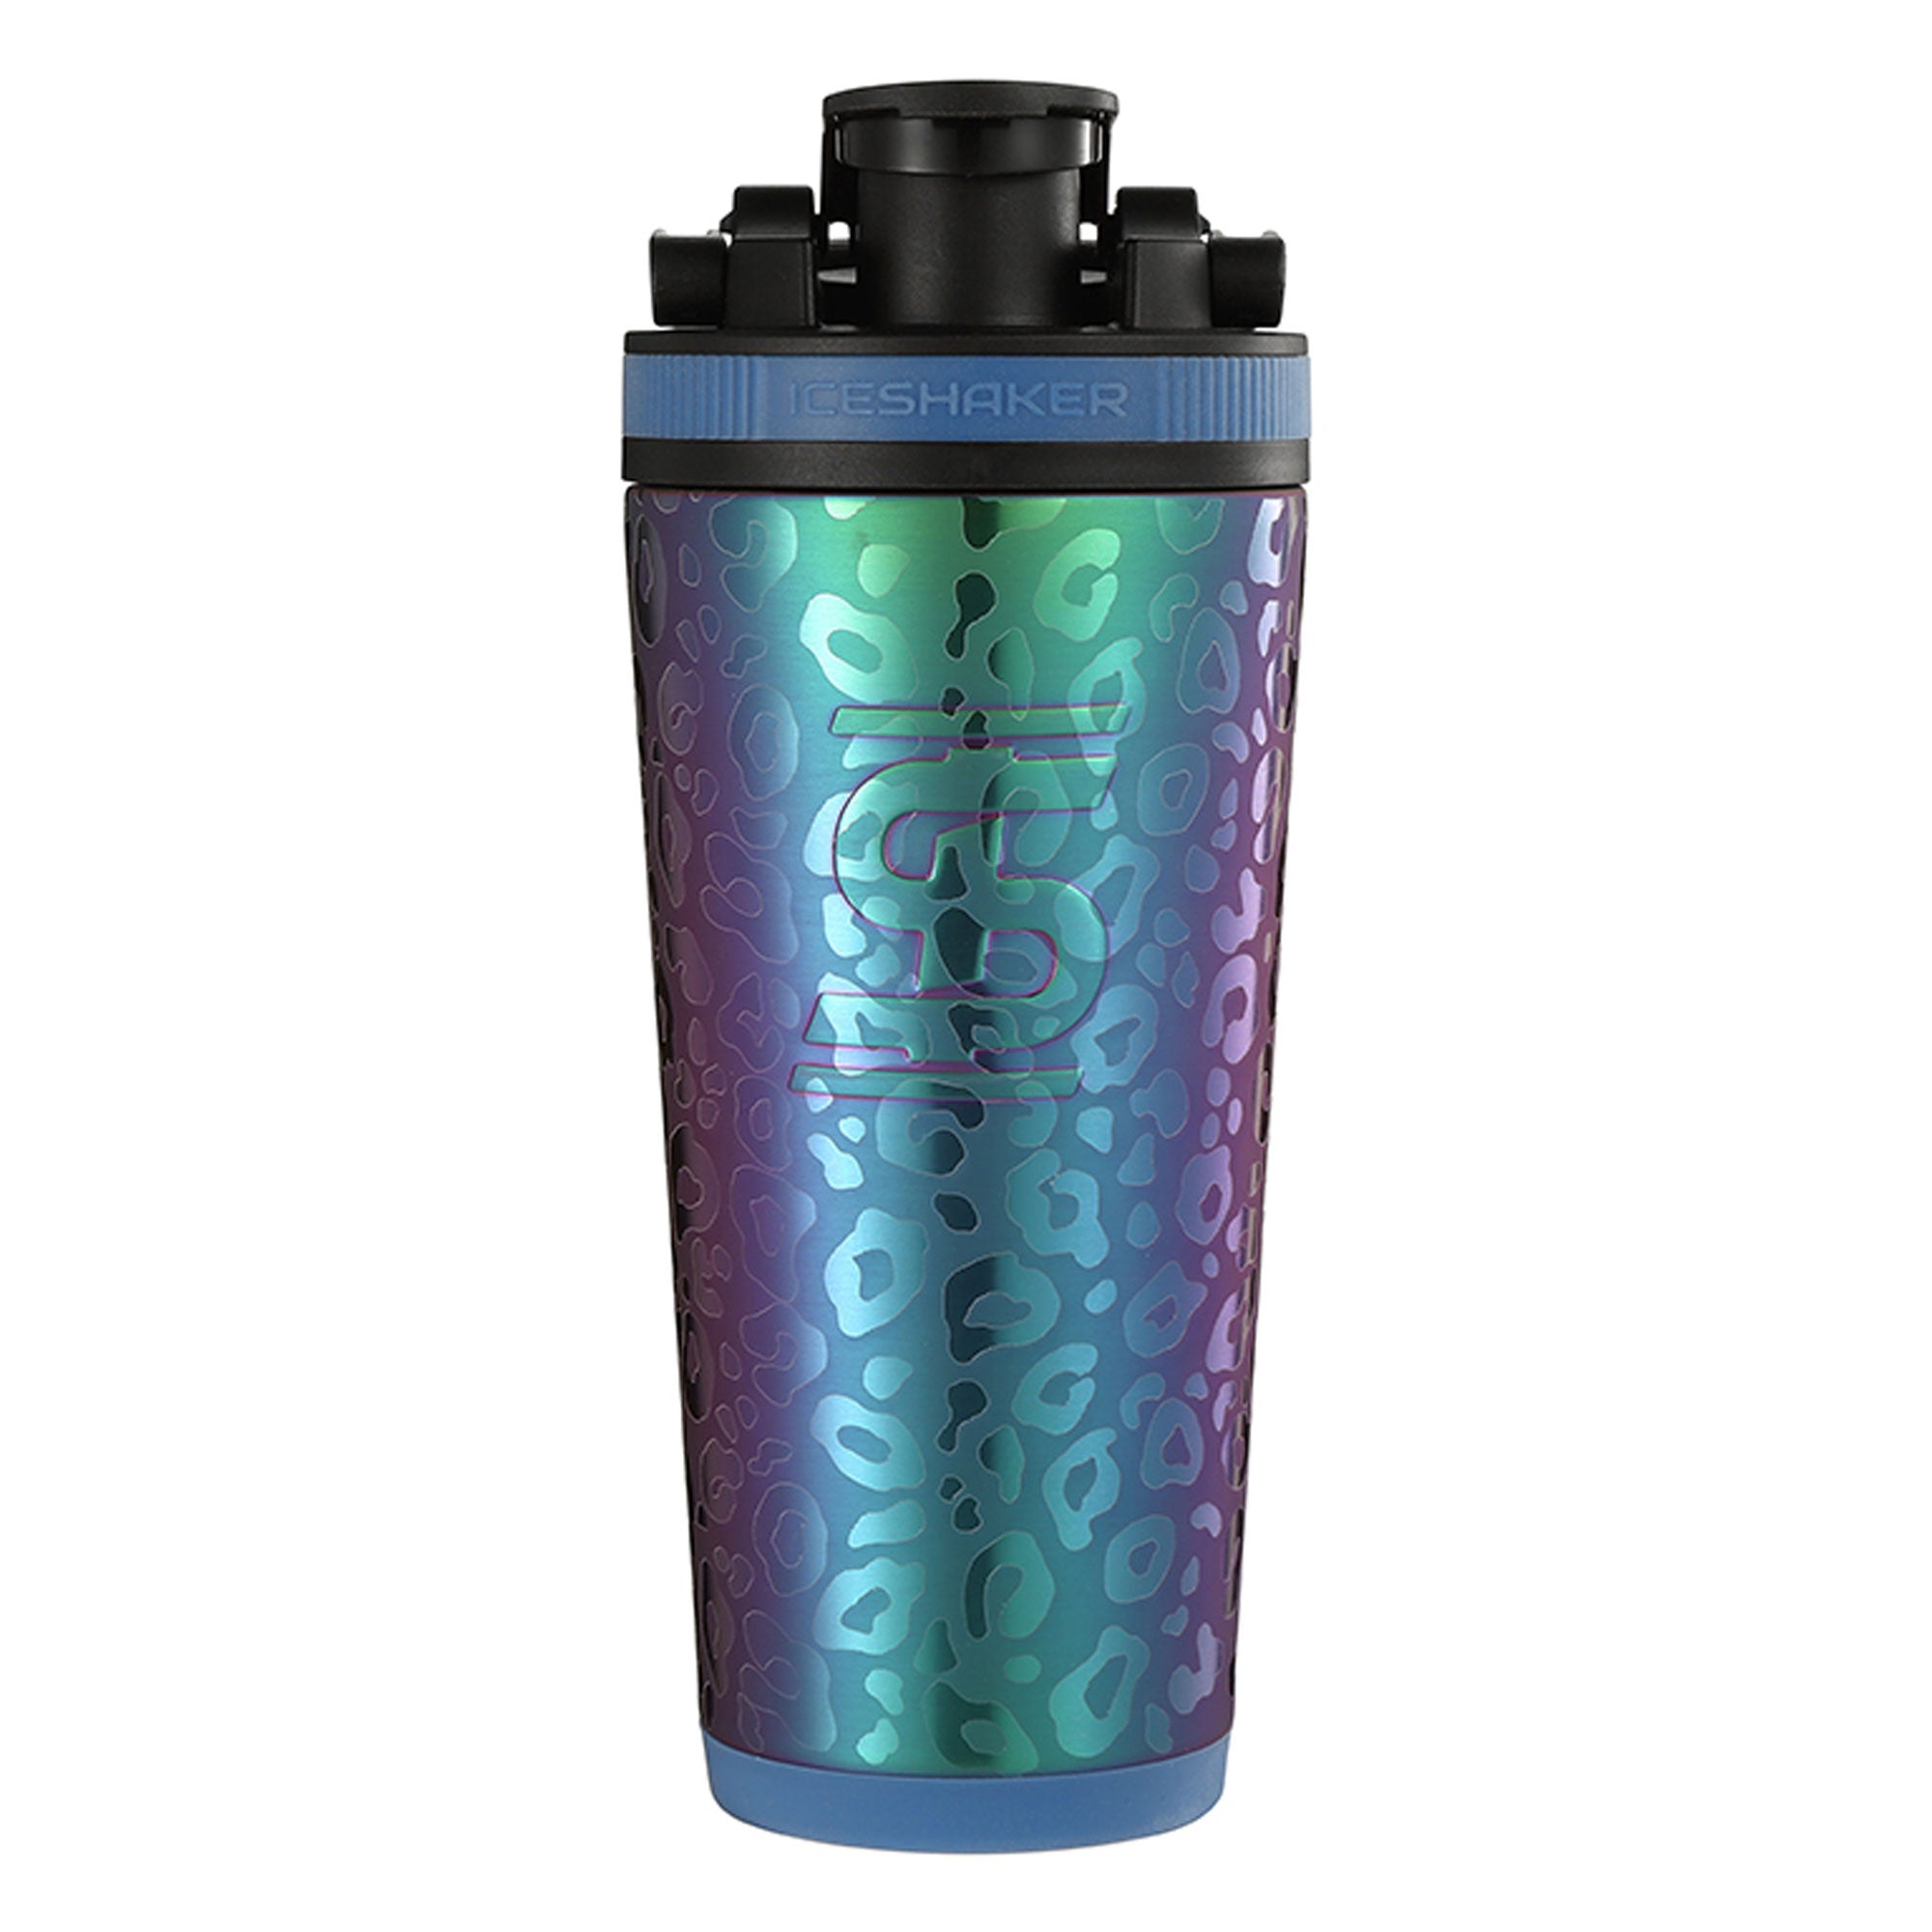 MooreMuscle Insulated Stainless Steel Shaker